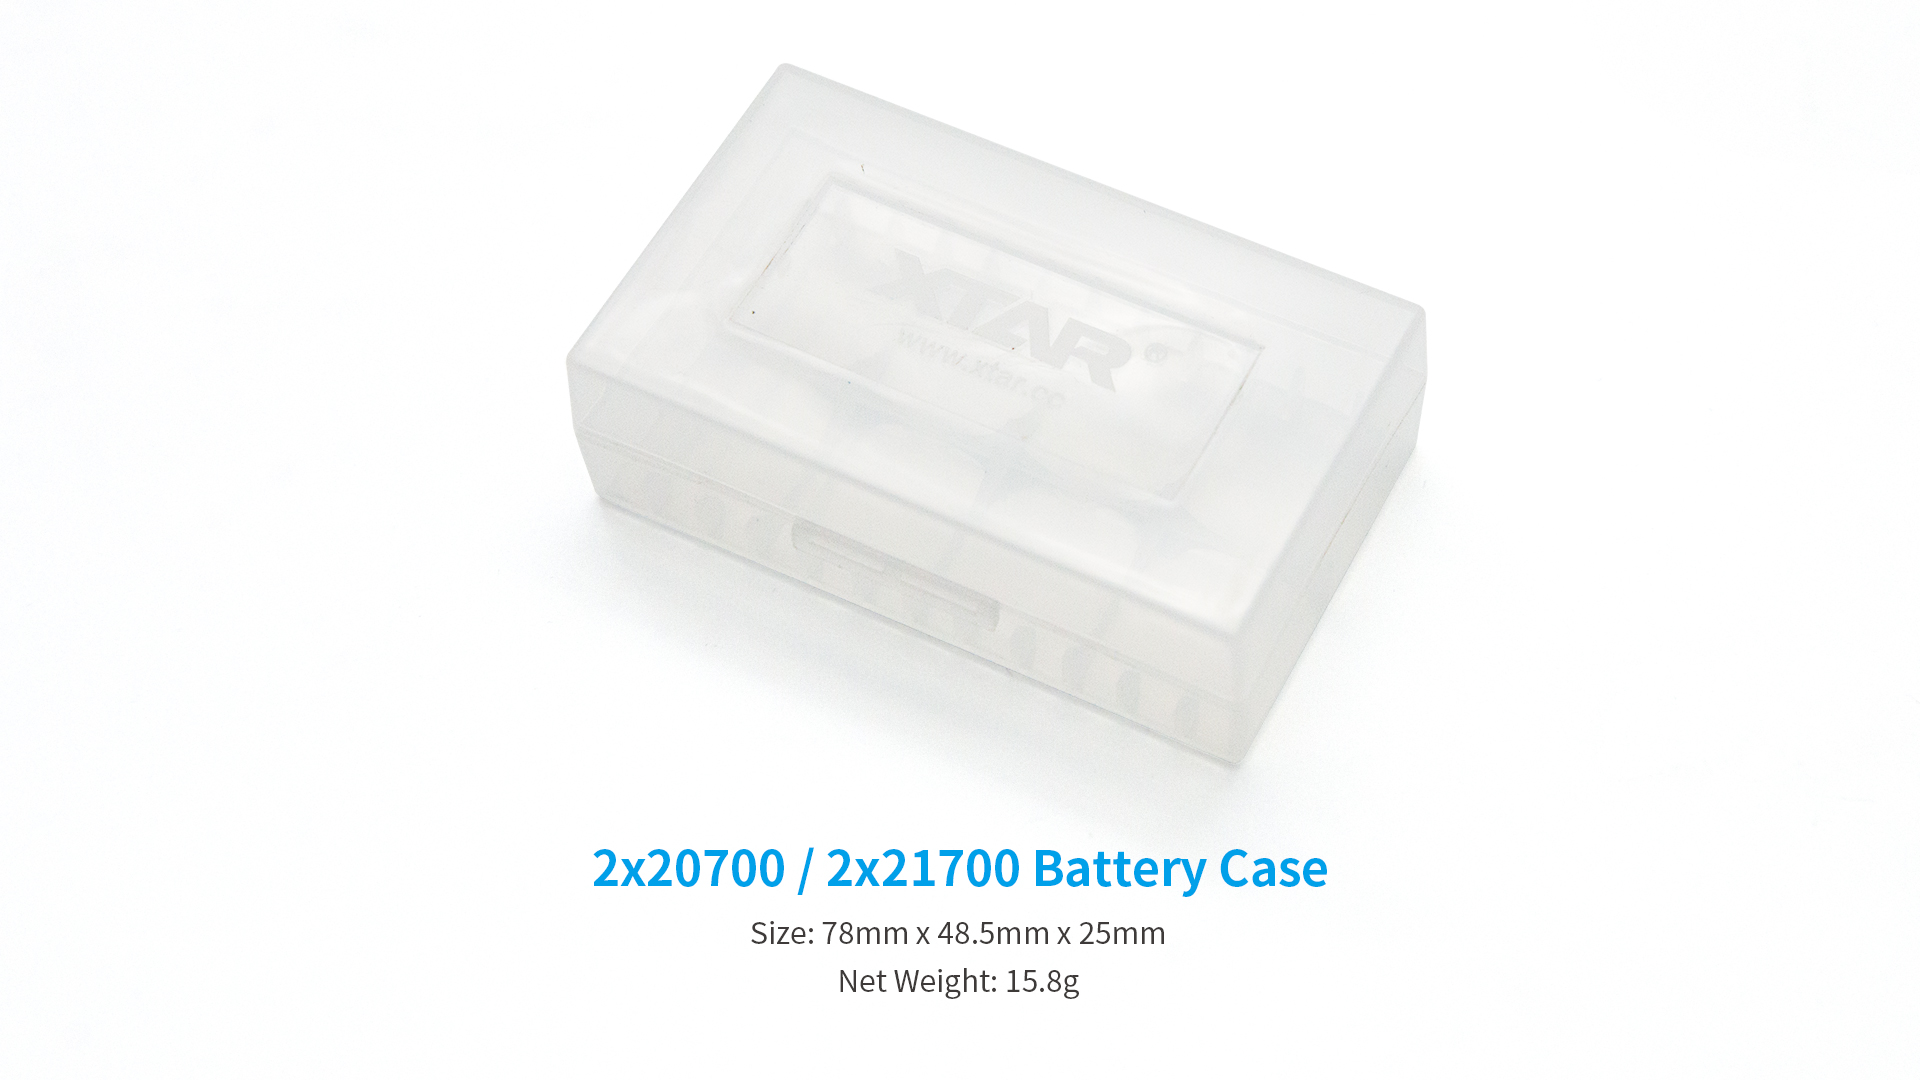 size of 21700 battery case: 78mm x 48.5mm x 25mm